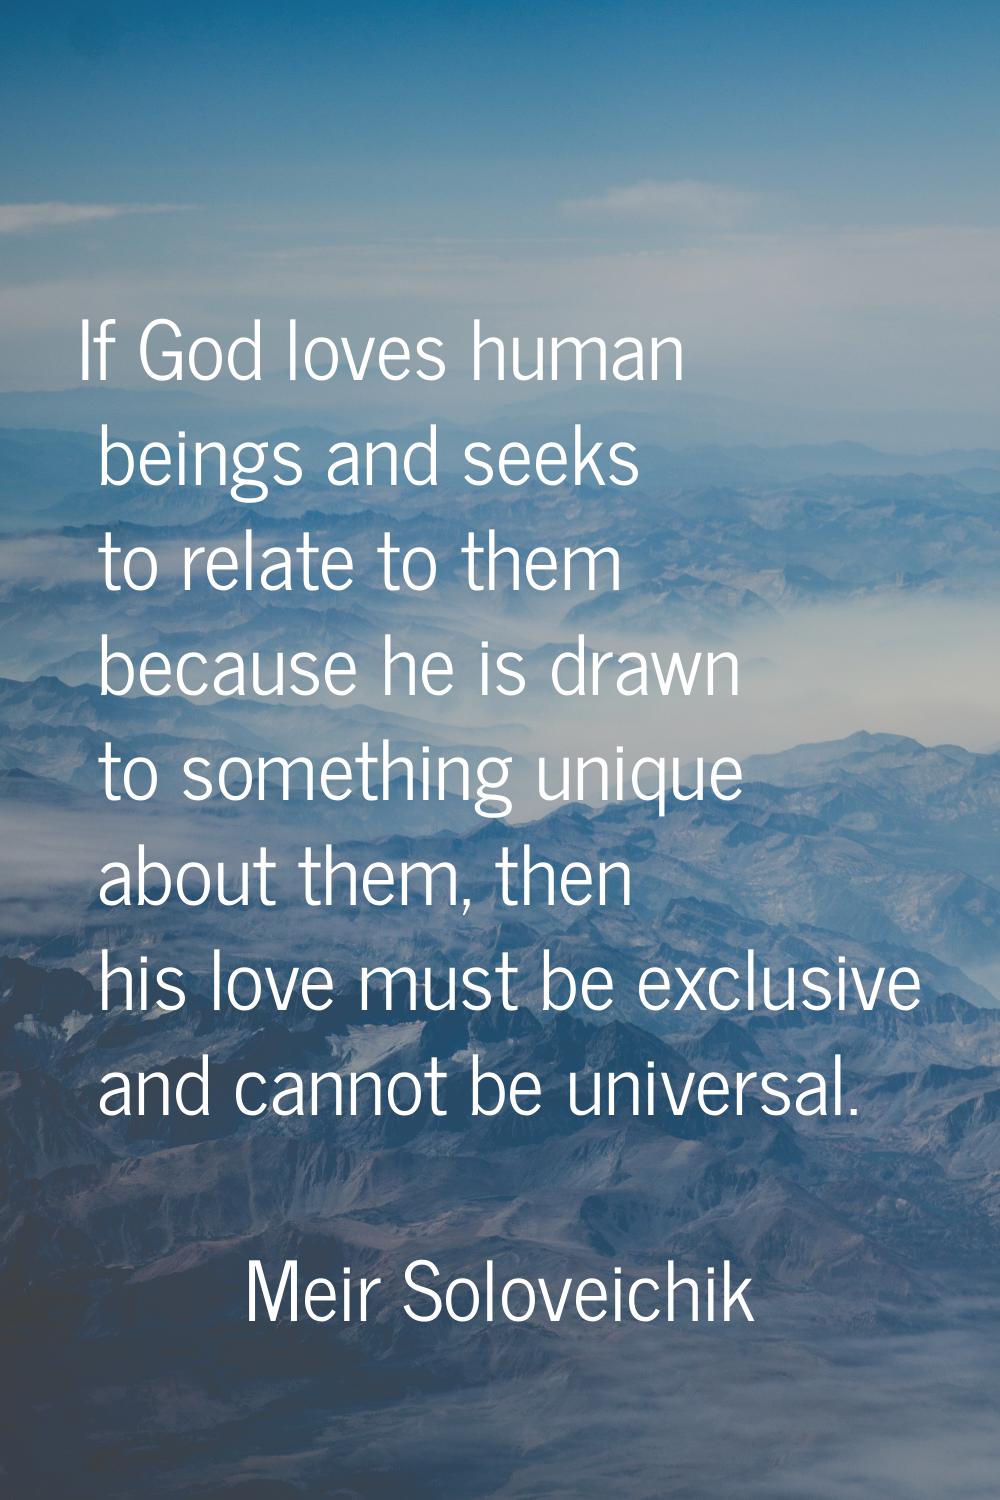 If God loves human beings and seeks to relate to them because he is drawn to something unique about